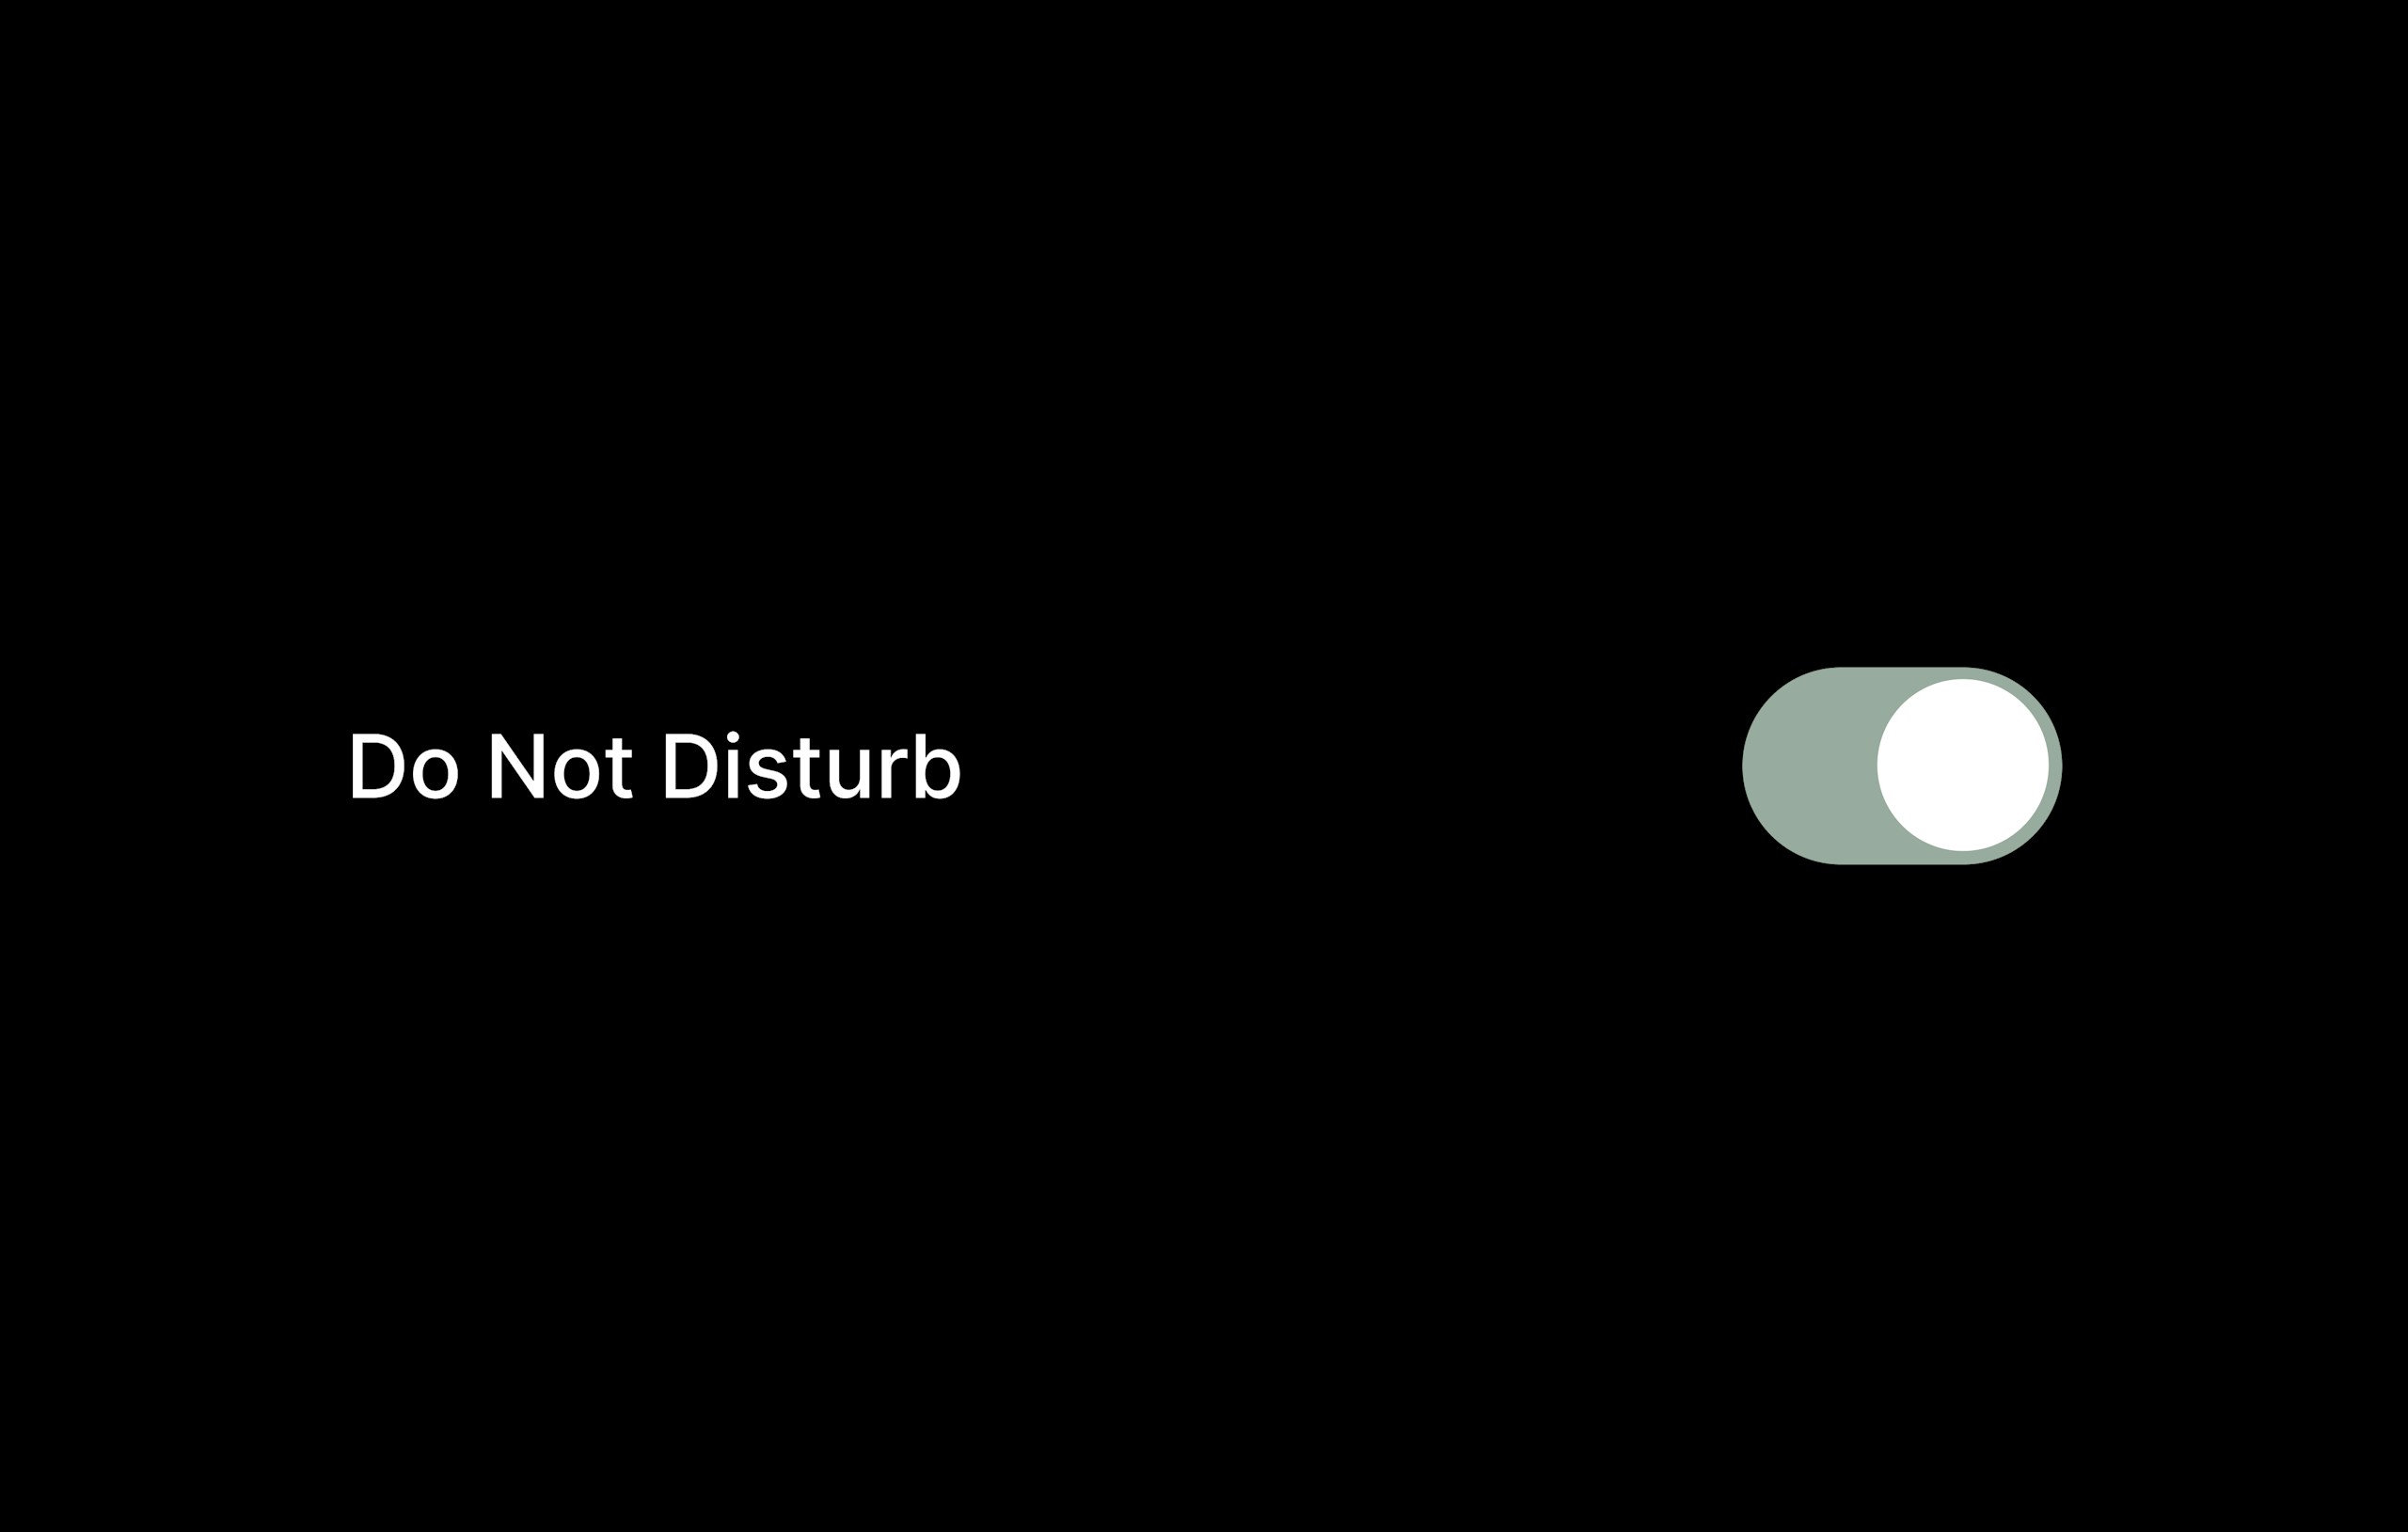 an image of a the Do Not Disturb option on a phone